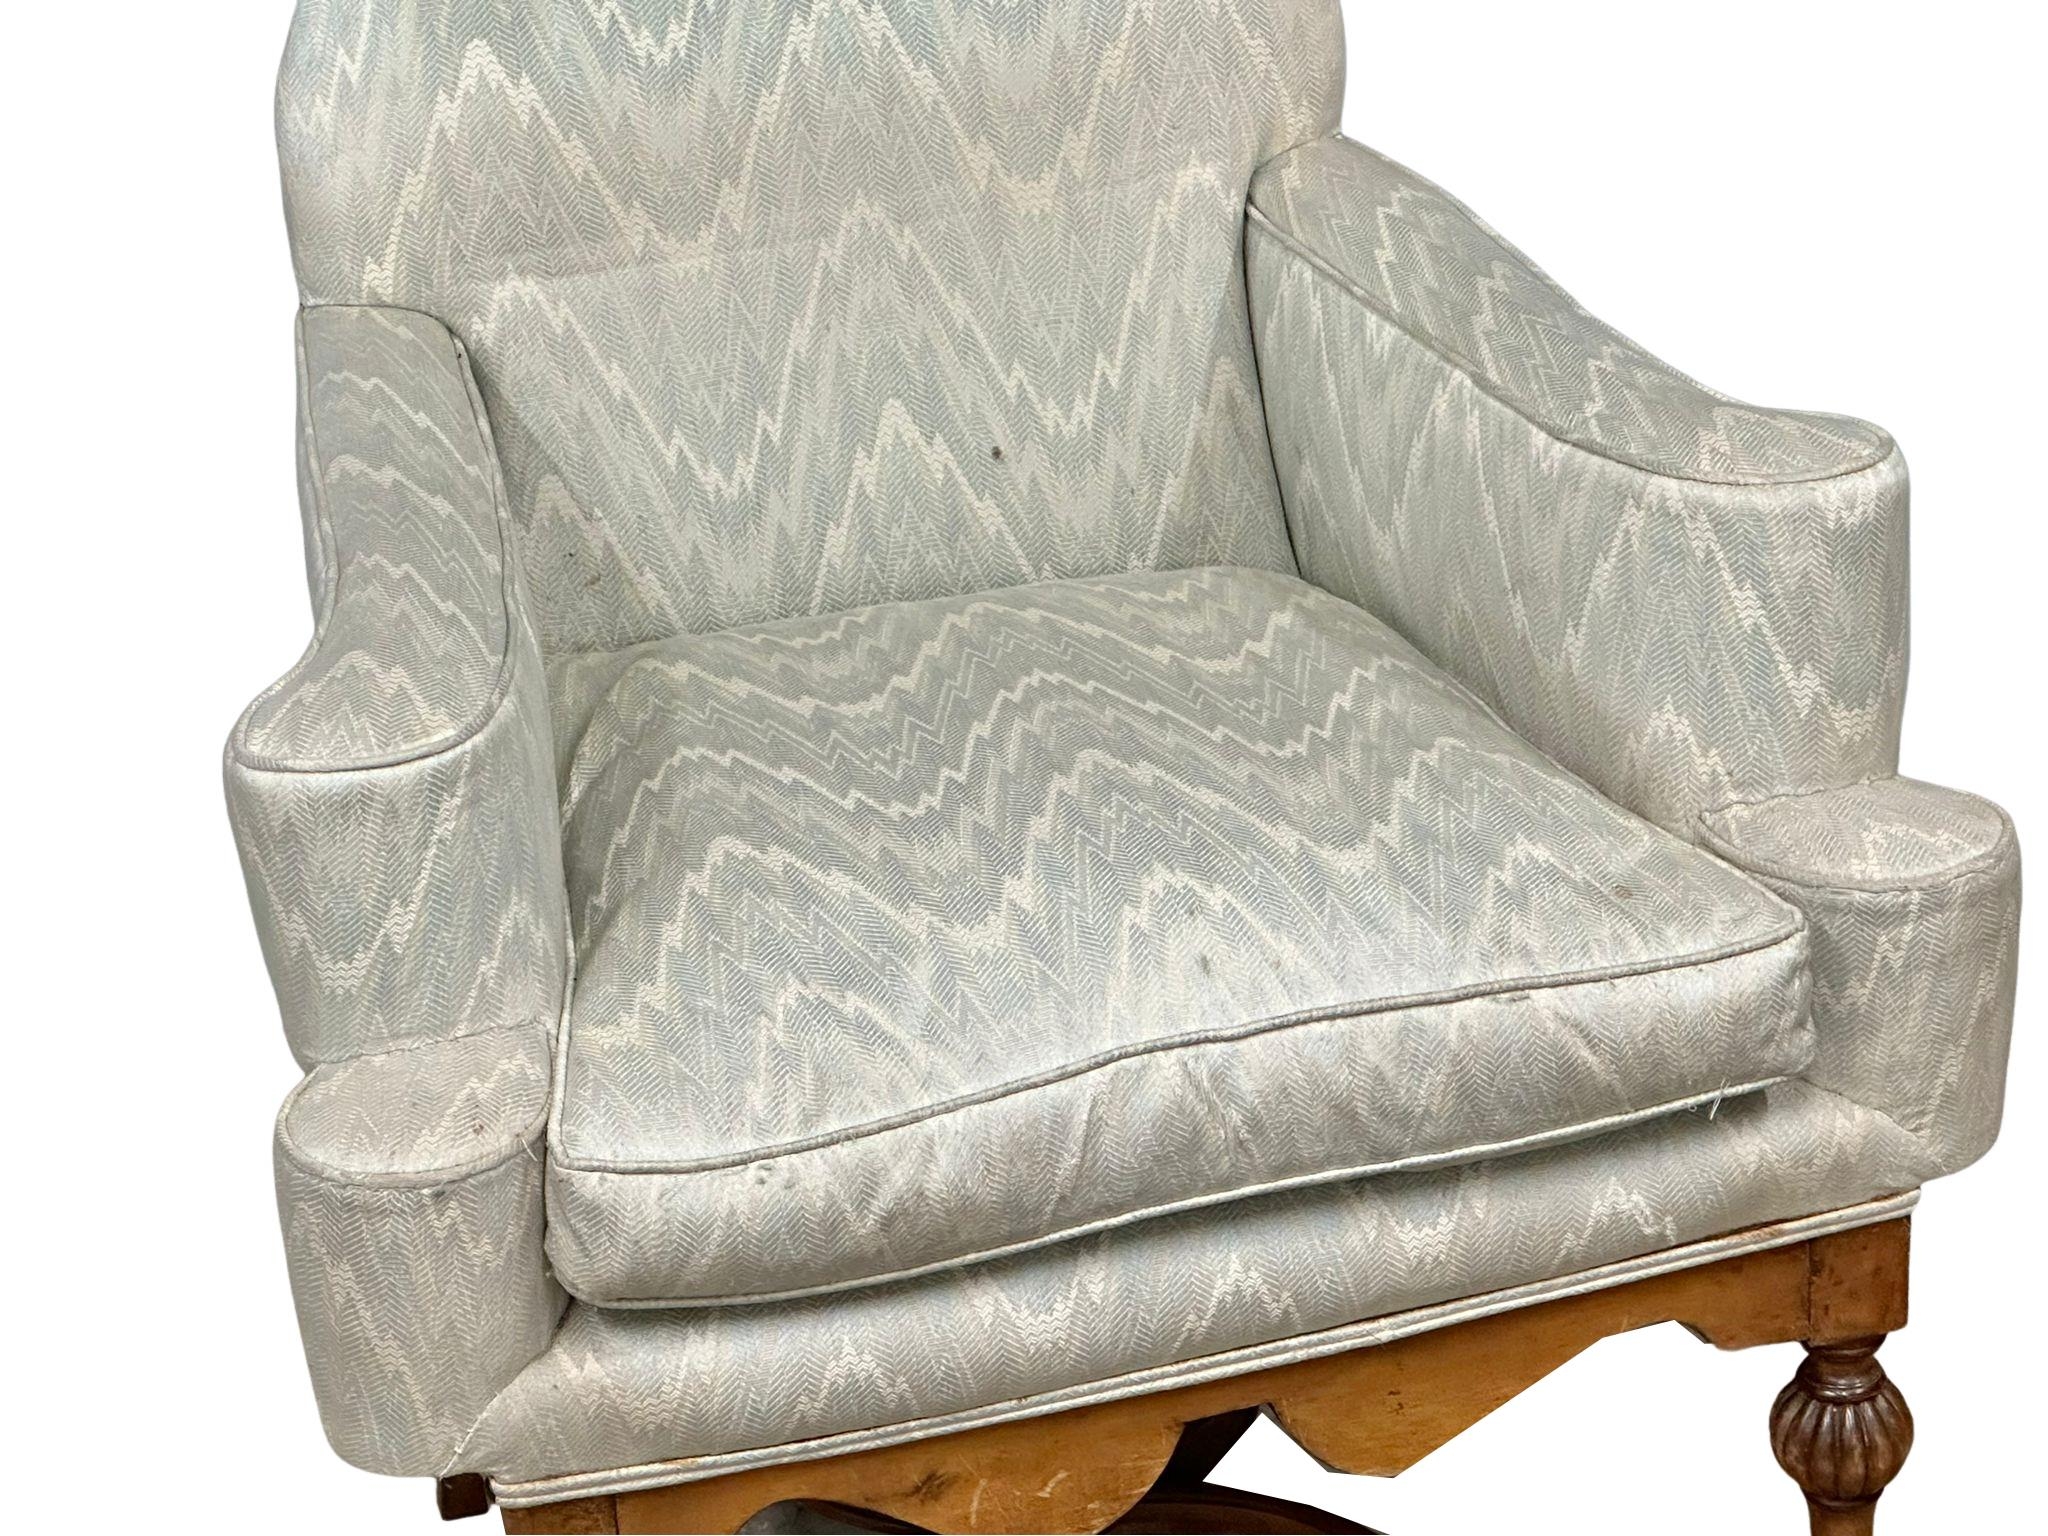 An early 20th century Charles II Carolean Revival armchair. Circa 1930. 63x80x122cm - Image 2 of 7